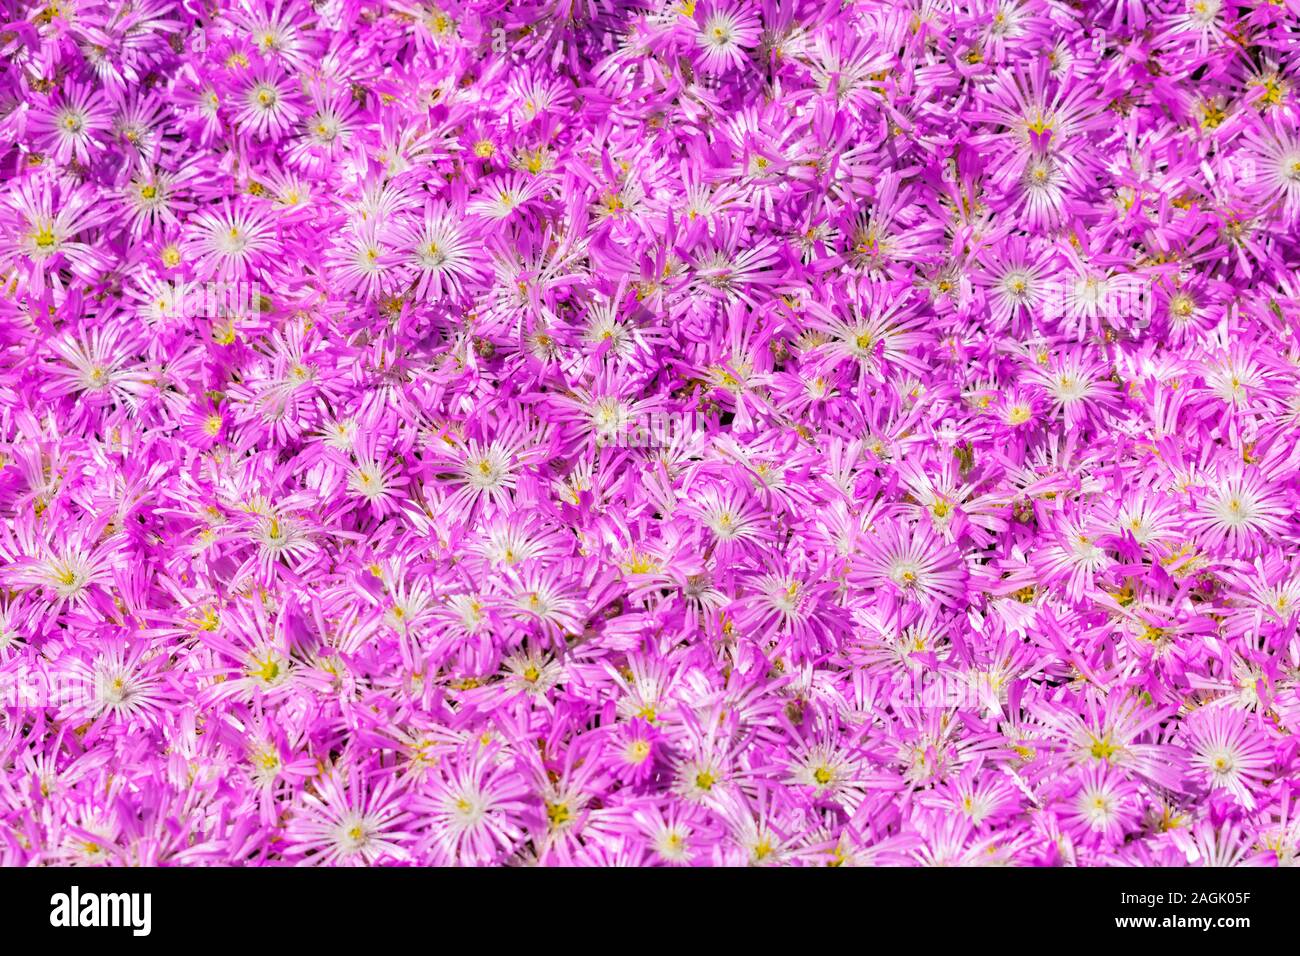 Colorful blooming pink and purple flower carpet close up. Lampranthus is flowering succulent plant in Aizoaceae family. Stock Photo